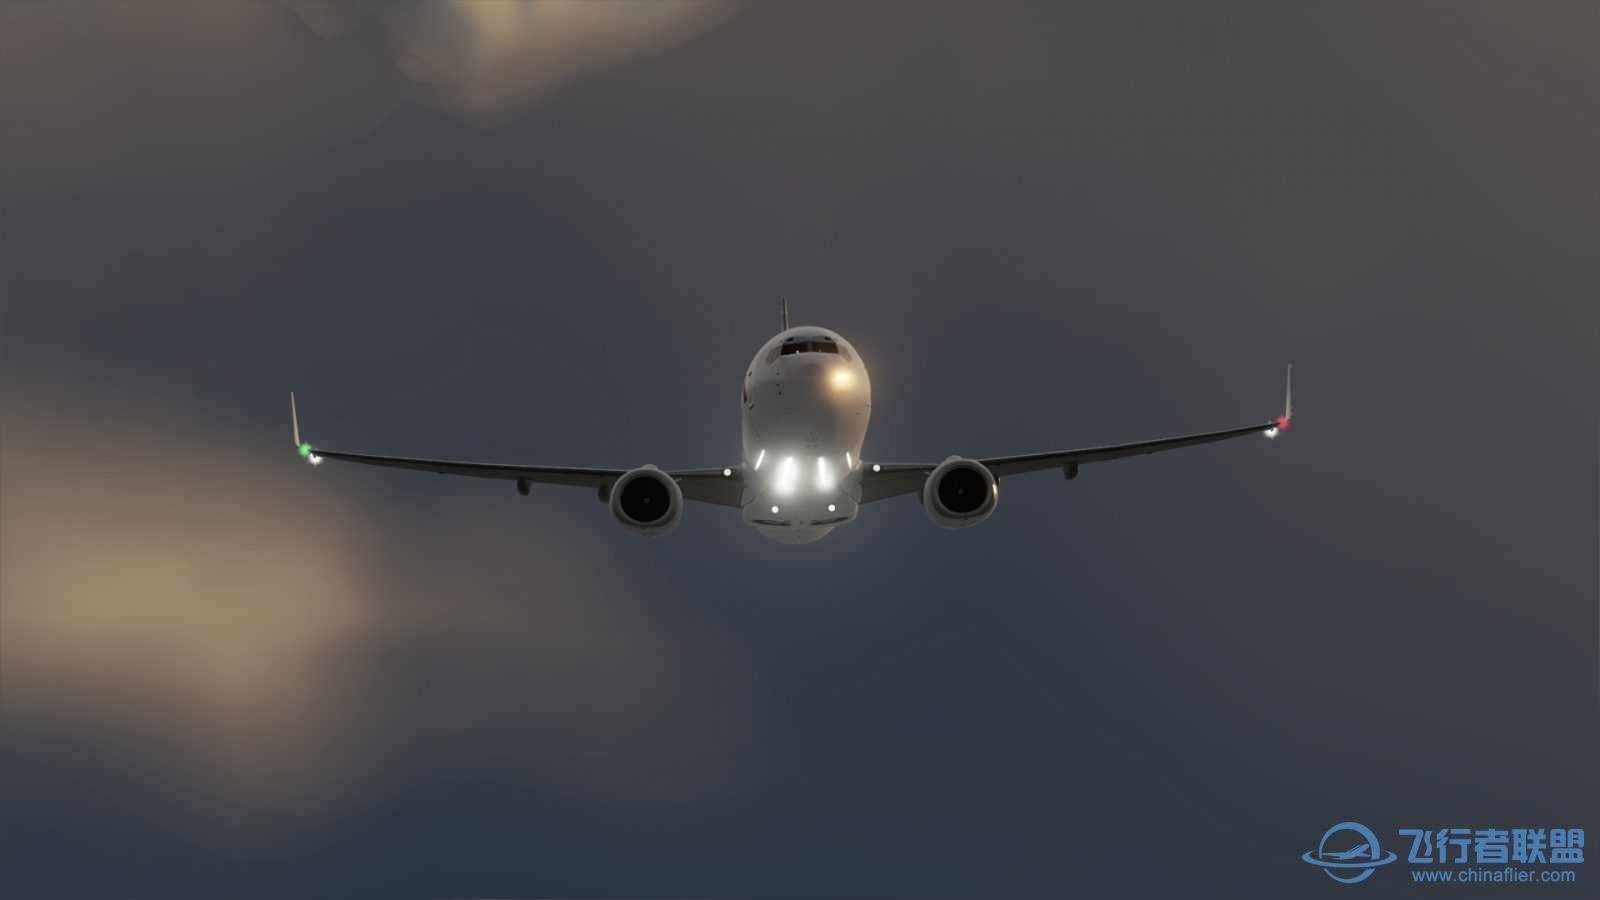 ifly-jets-advanced-series-737ng-release-candidate-p3d-10-1600x900.jpg